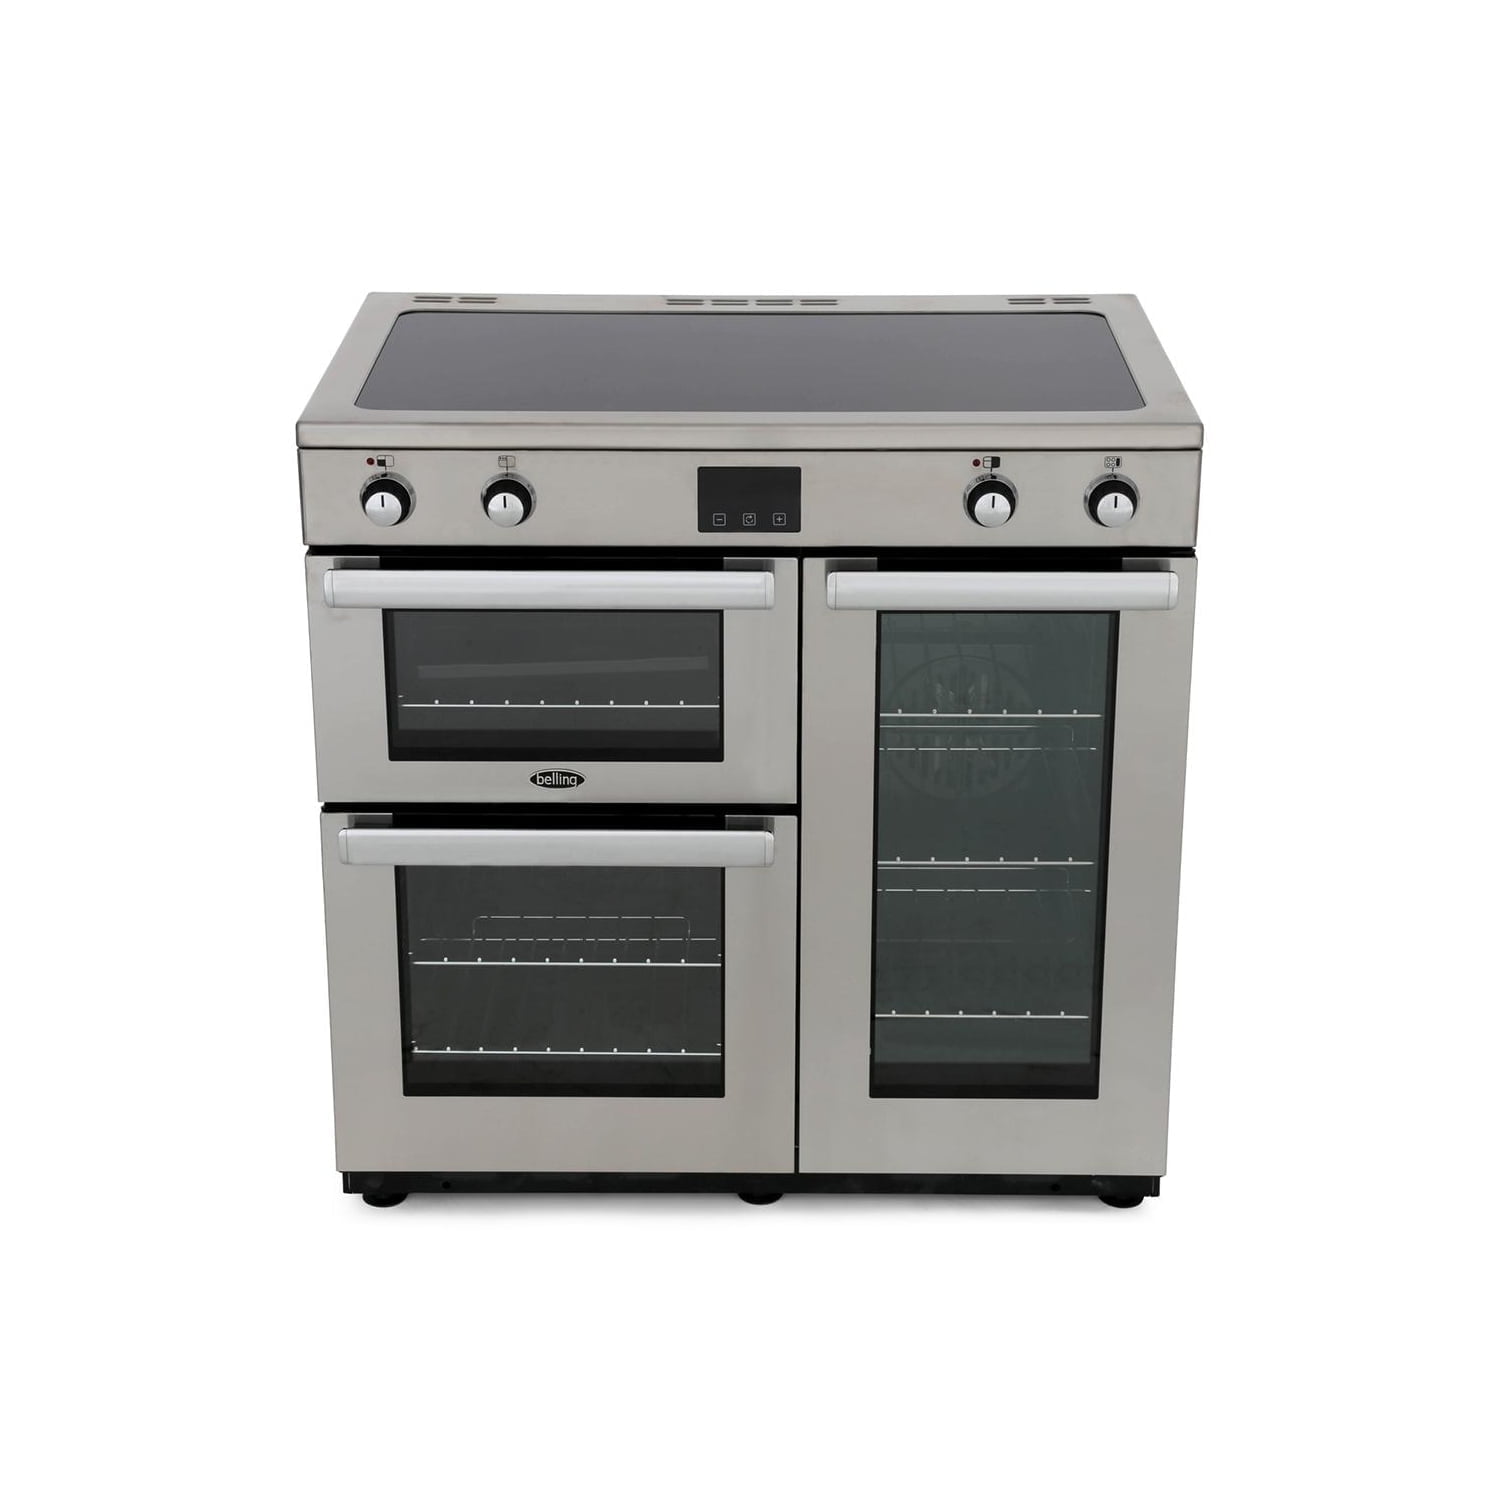 Belling Cookcentre 90Ei PROF Stainless Steel 90cm Electric Induction Range Cooker